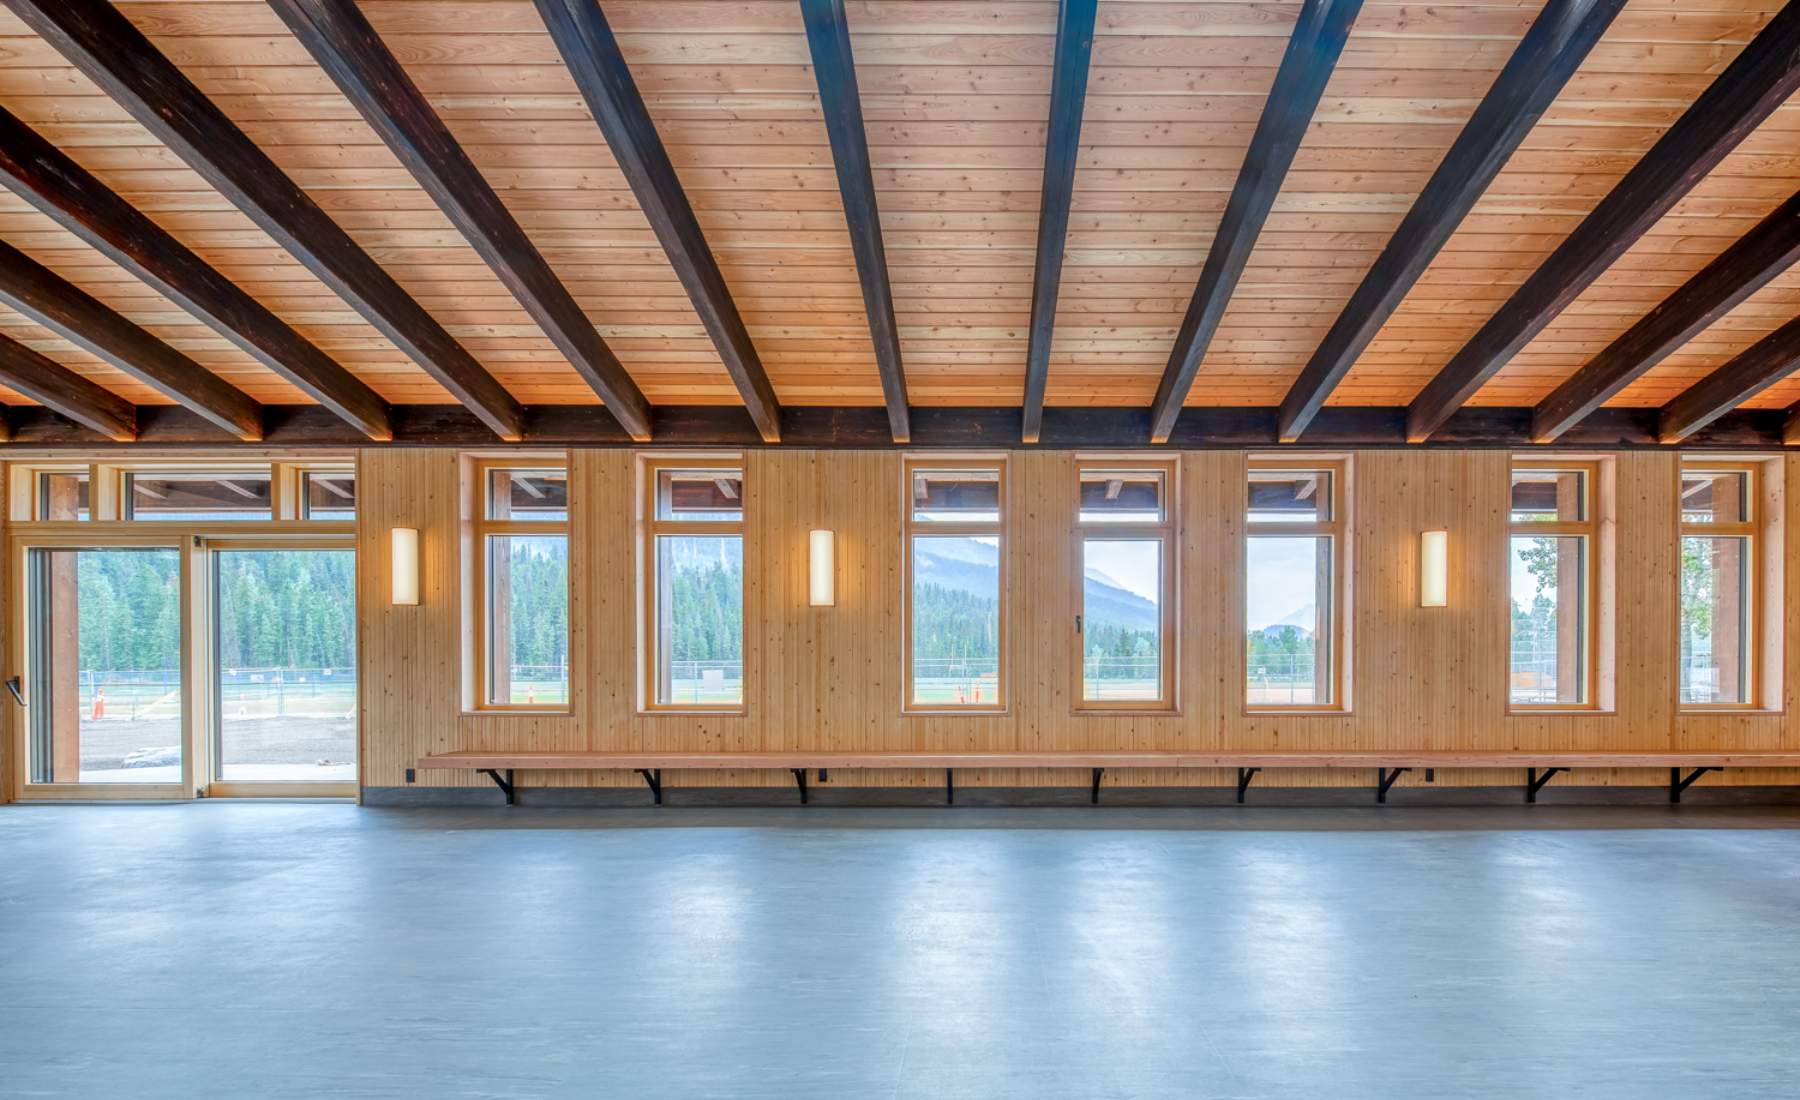 hybrid mass timber solutions with glulam, dlt, wood fibre board